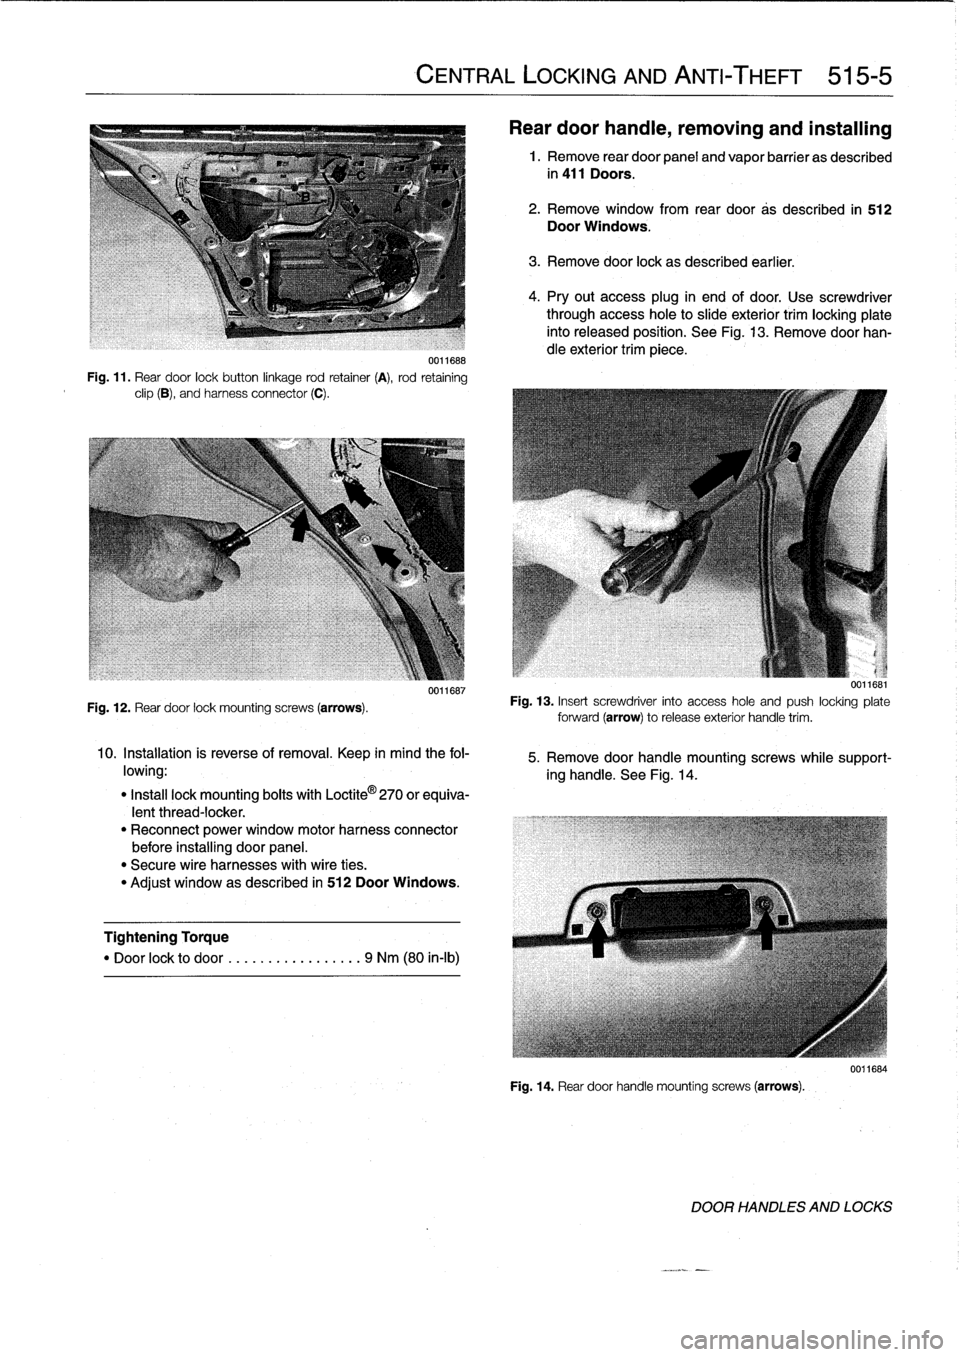 BMW 318i 1996 E36 Owners Guide 
0011688

Fig
.
11
.
Rear
door
lockbutton
linkage
rod
retainer
(A),
rod
retaining
clip
(B),
and
harness
connector
(C)
.

Fig
.
12
.
Rear
door
lock
mounting
screws
(arrows)
.

0011687

10
.
Installatio